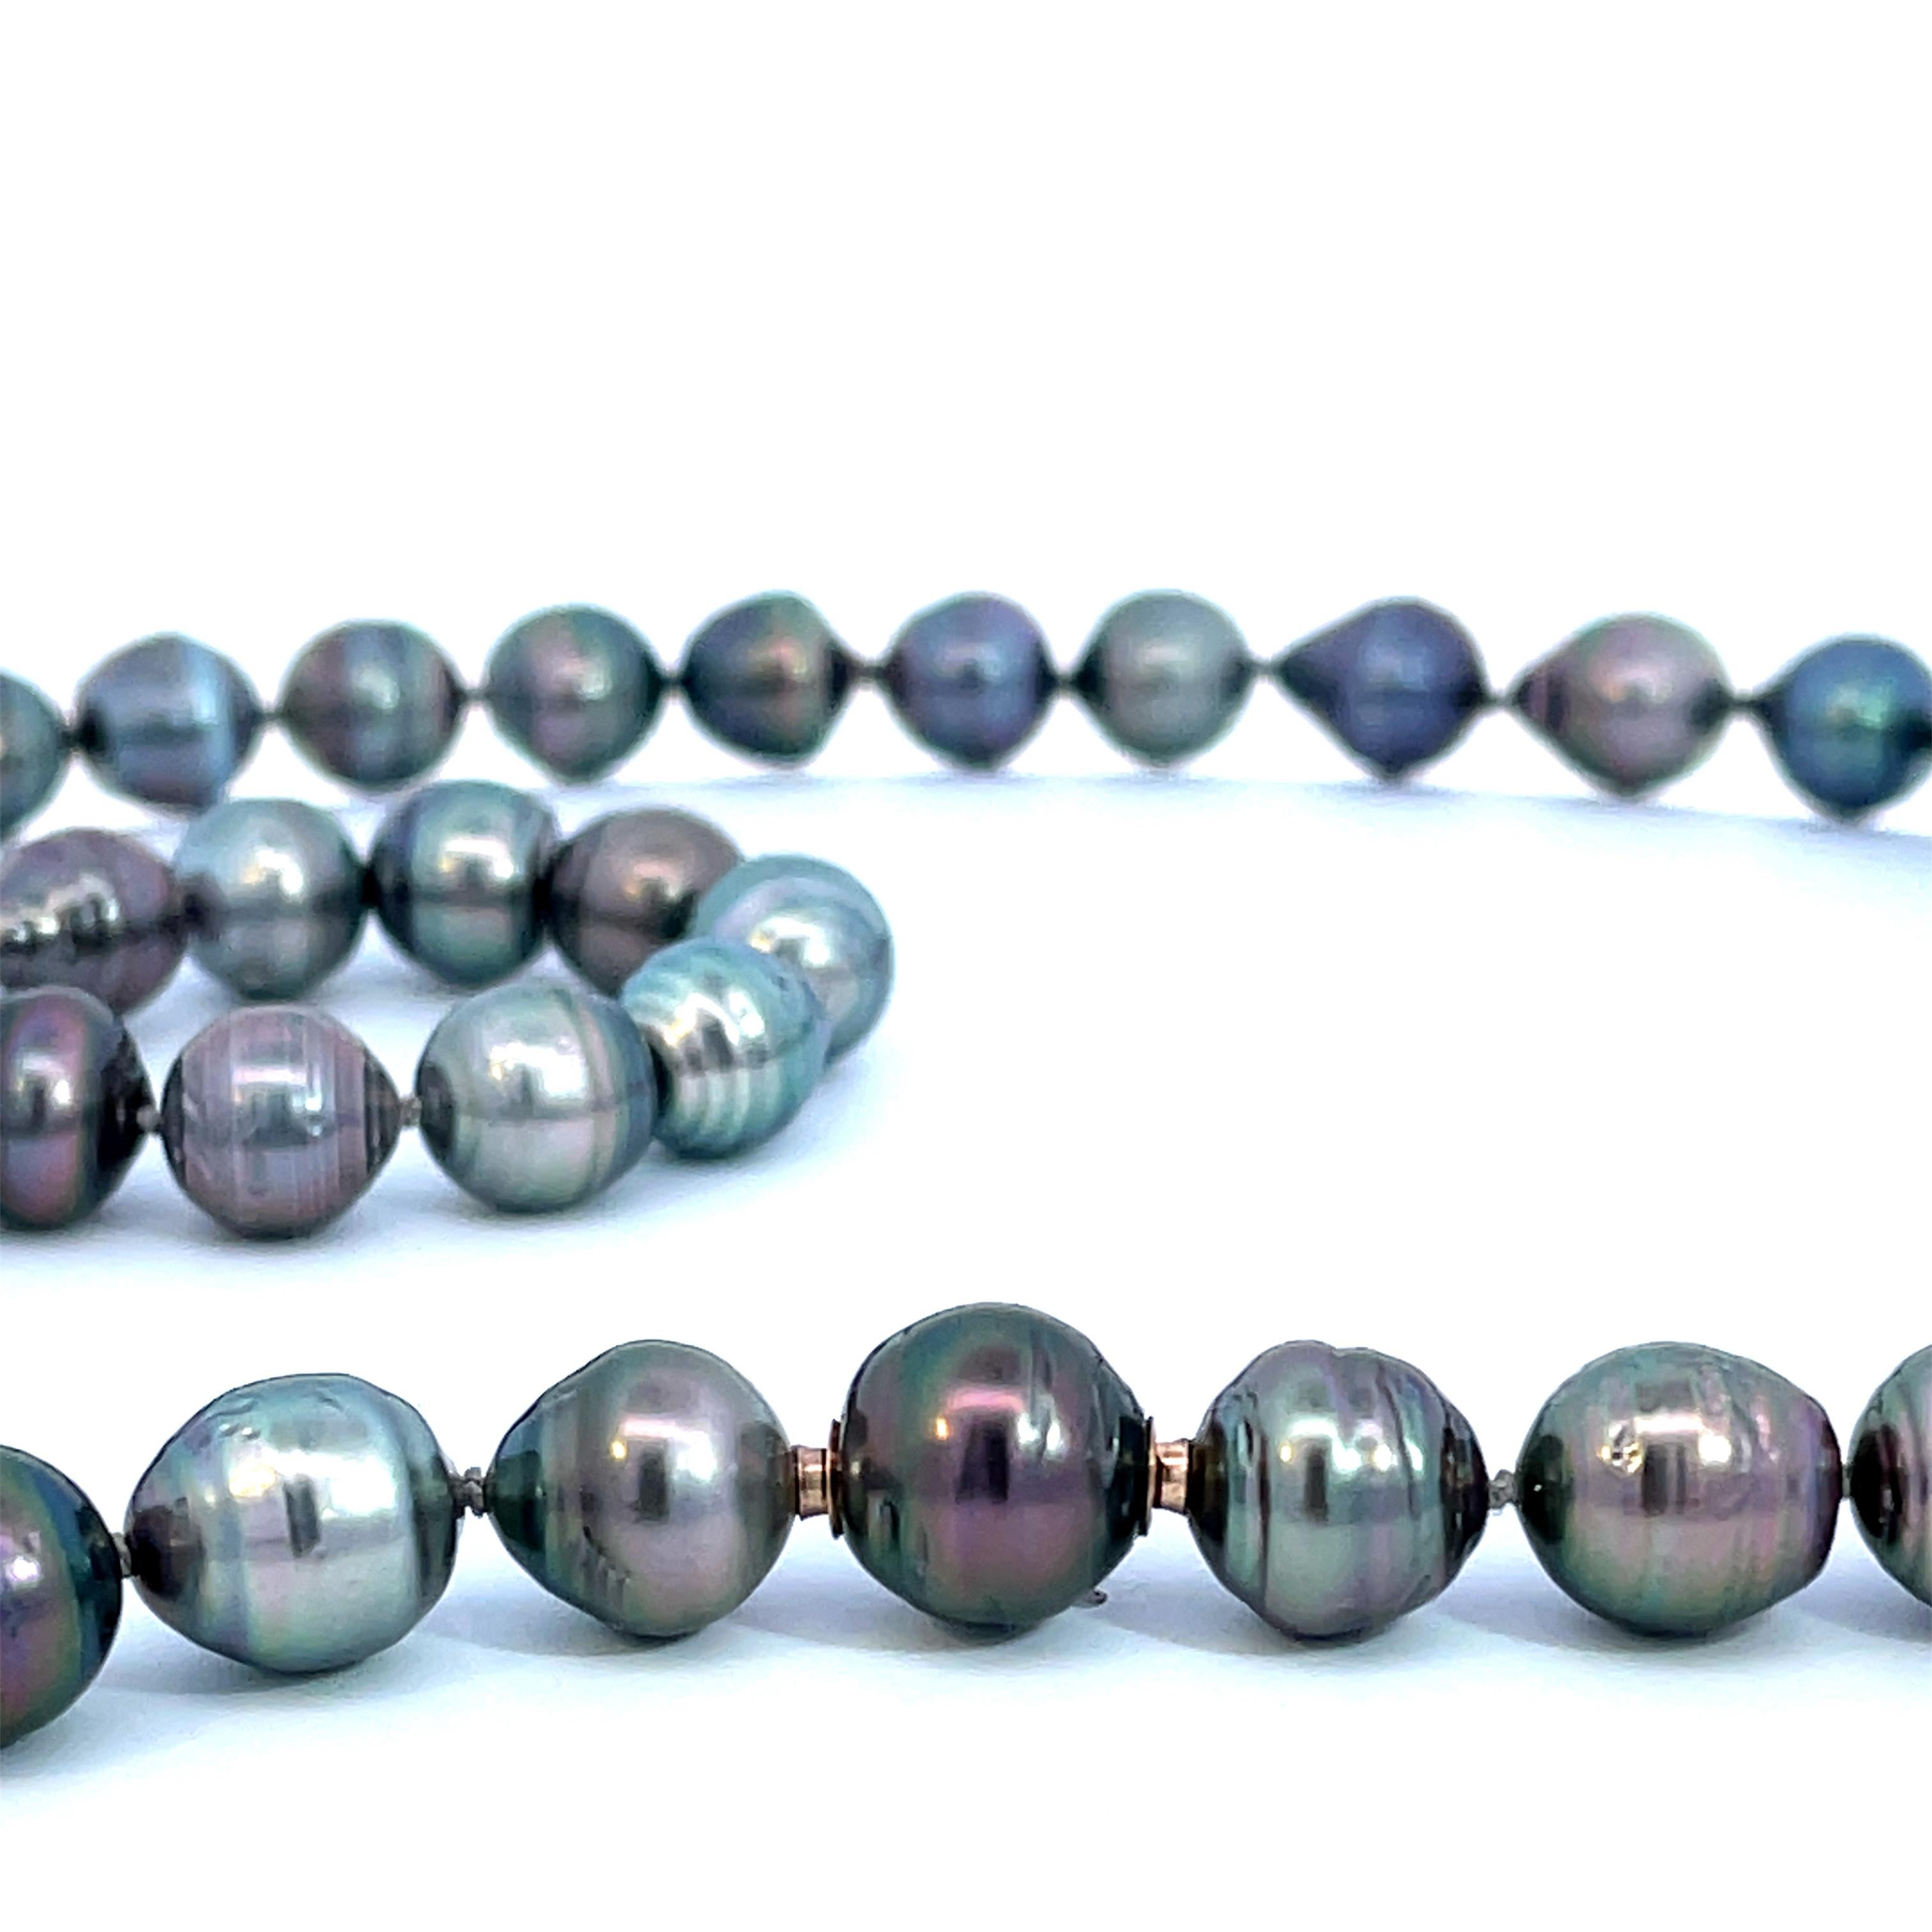 Bead Modular Tahitian Pearl Strand with 18k Rose Gold Keys and a Self Clasp For Sale